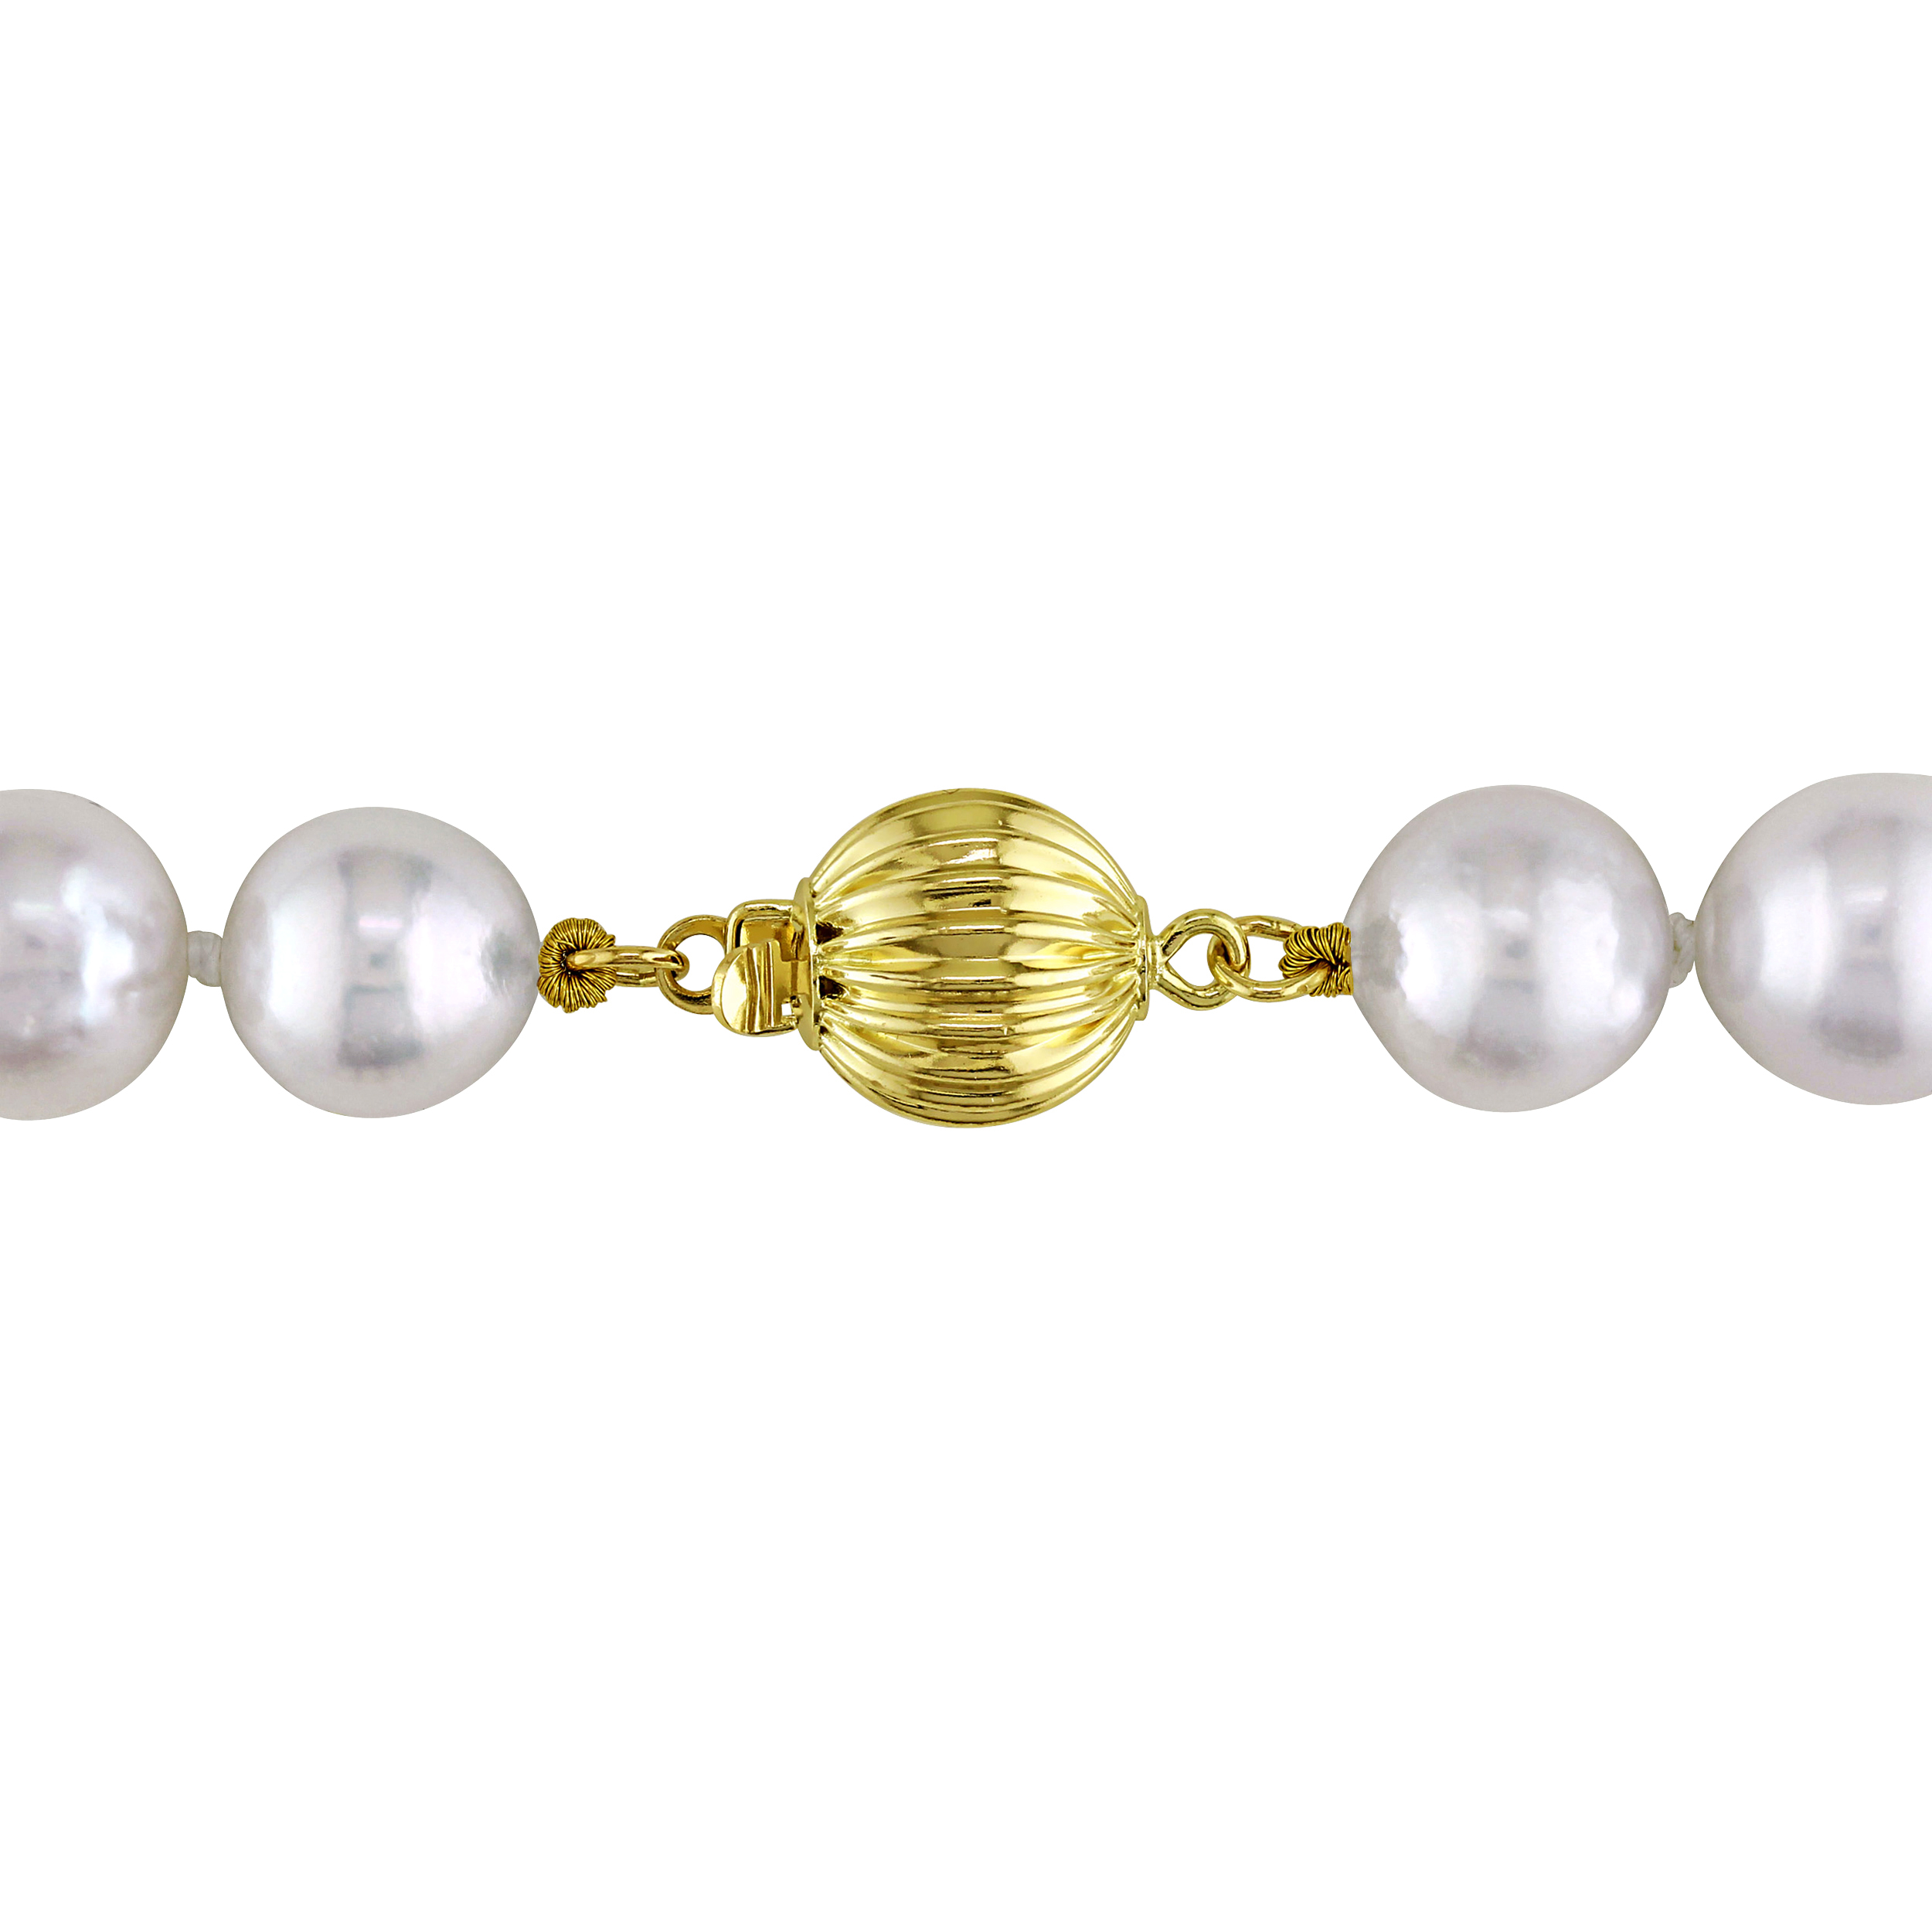 8.5-10 MM White Semi-Round White South Sea Pearl Strand Necklace with 14k Yellow Gold Clasp - 18 in